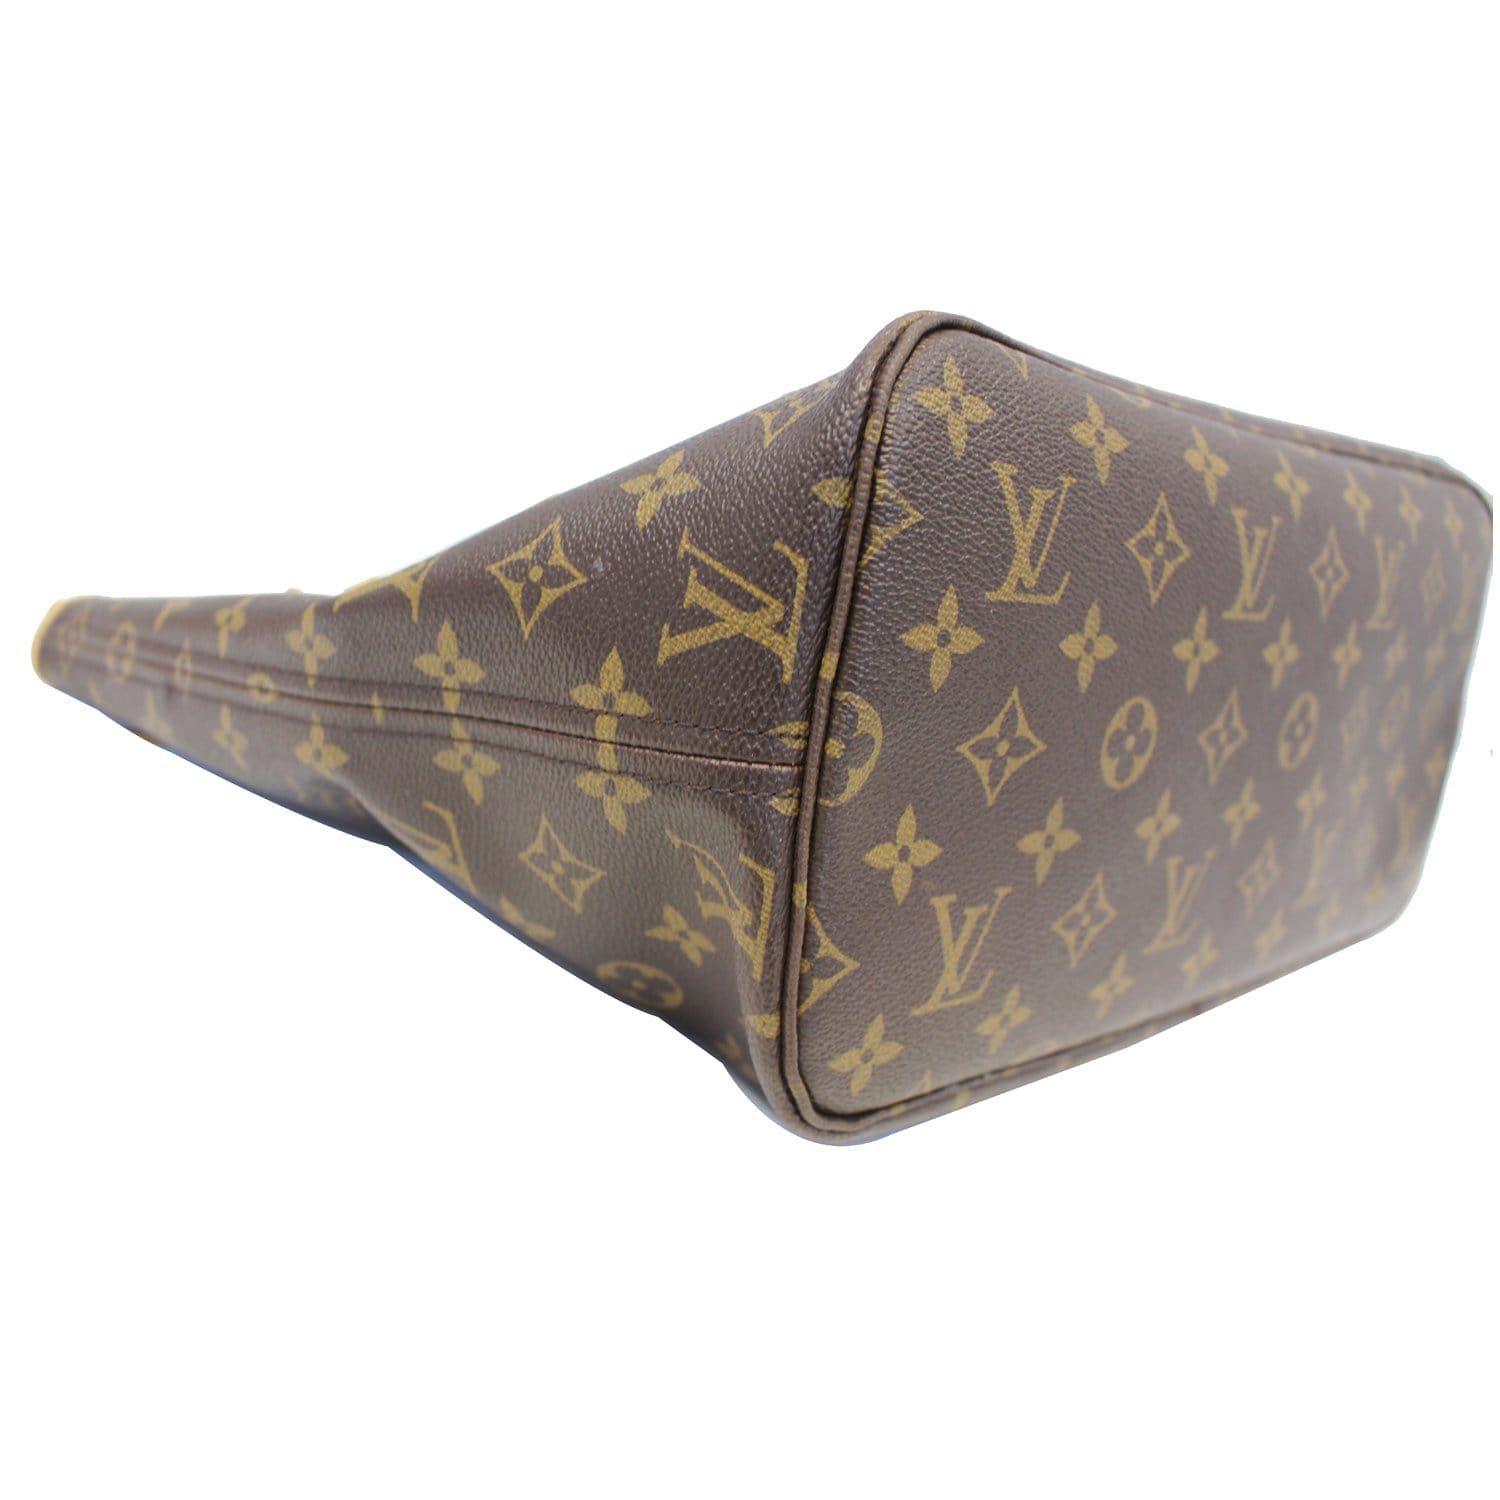 New 2016 Louis Vuitton Bags, Page 432